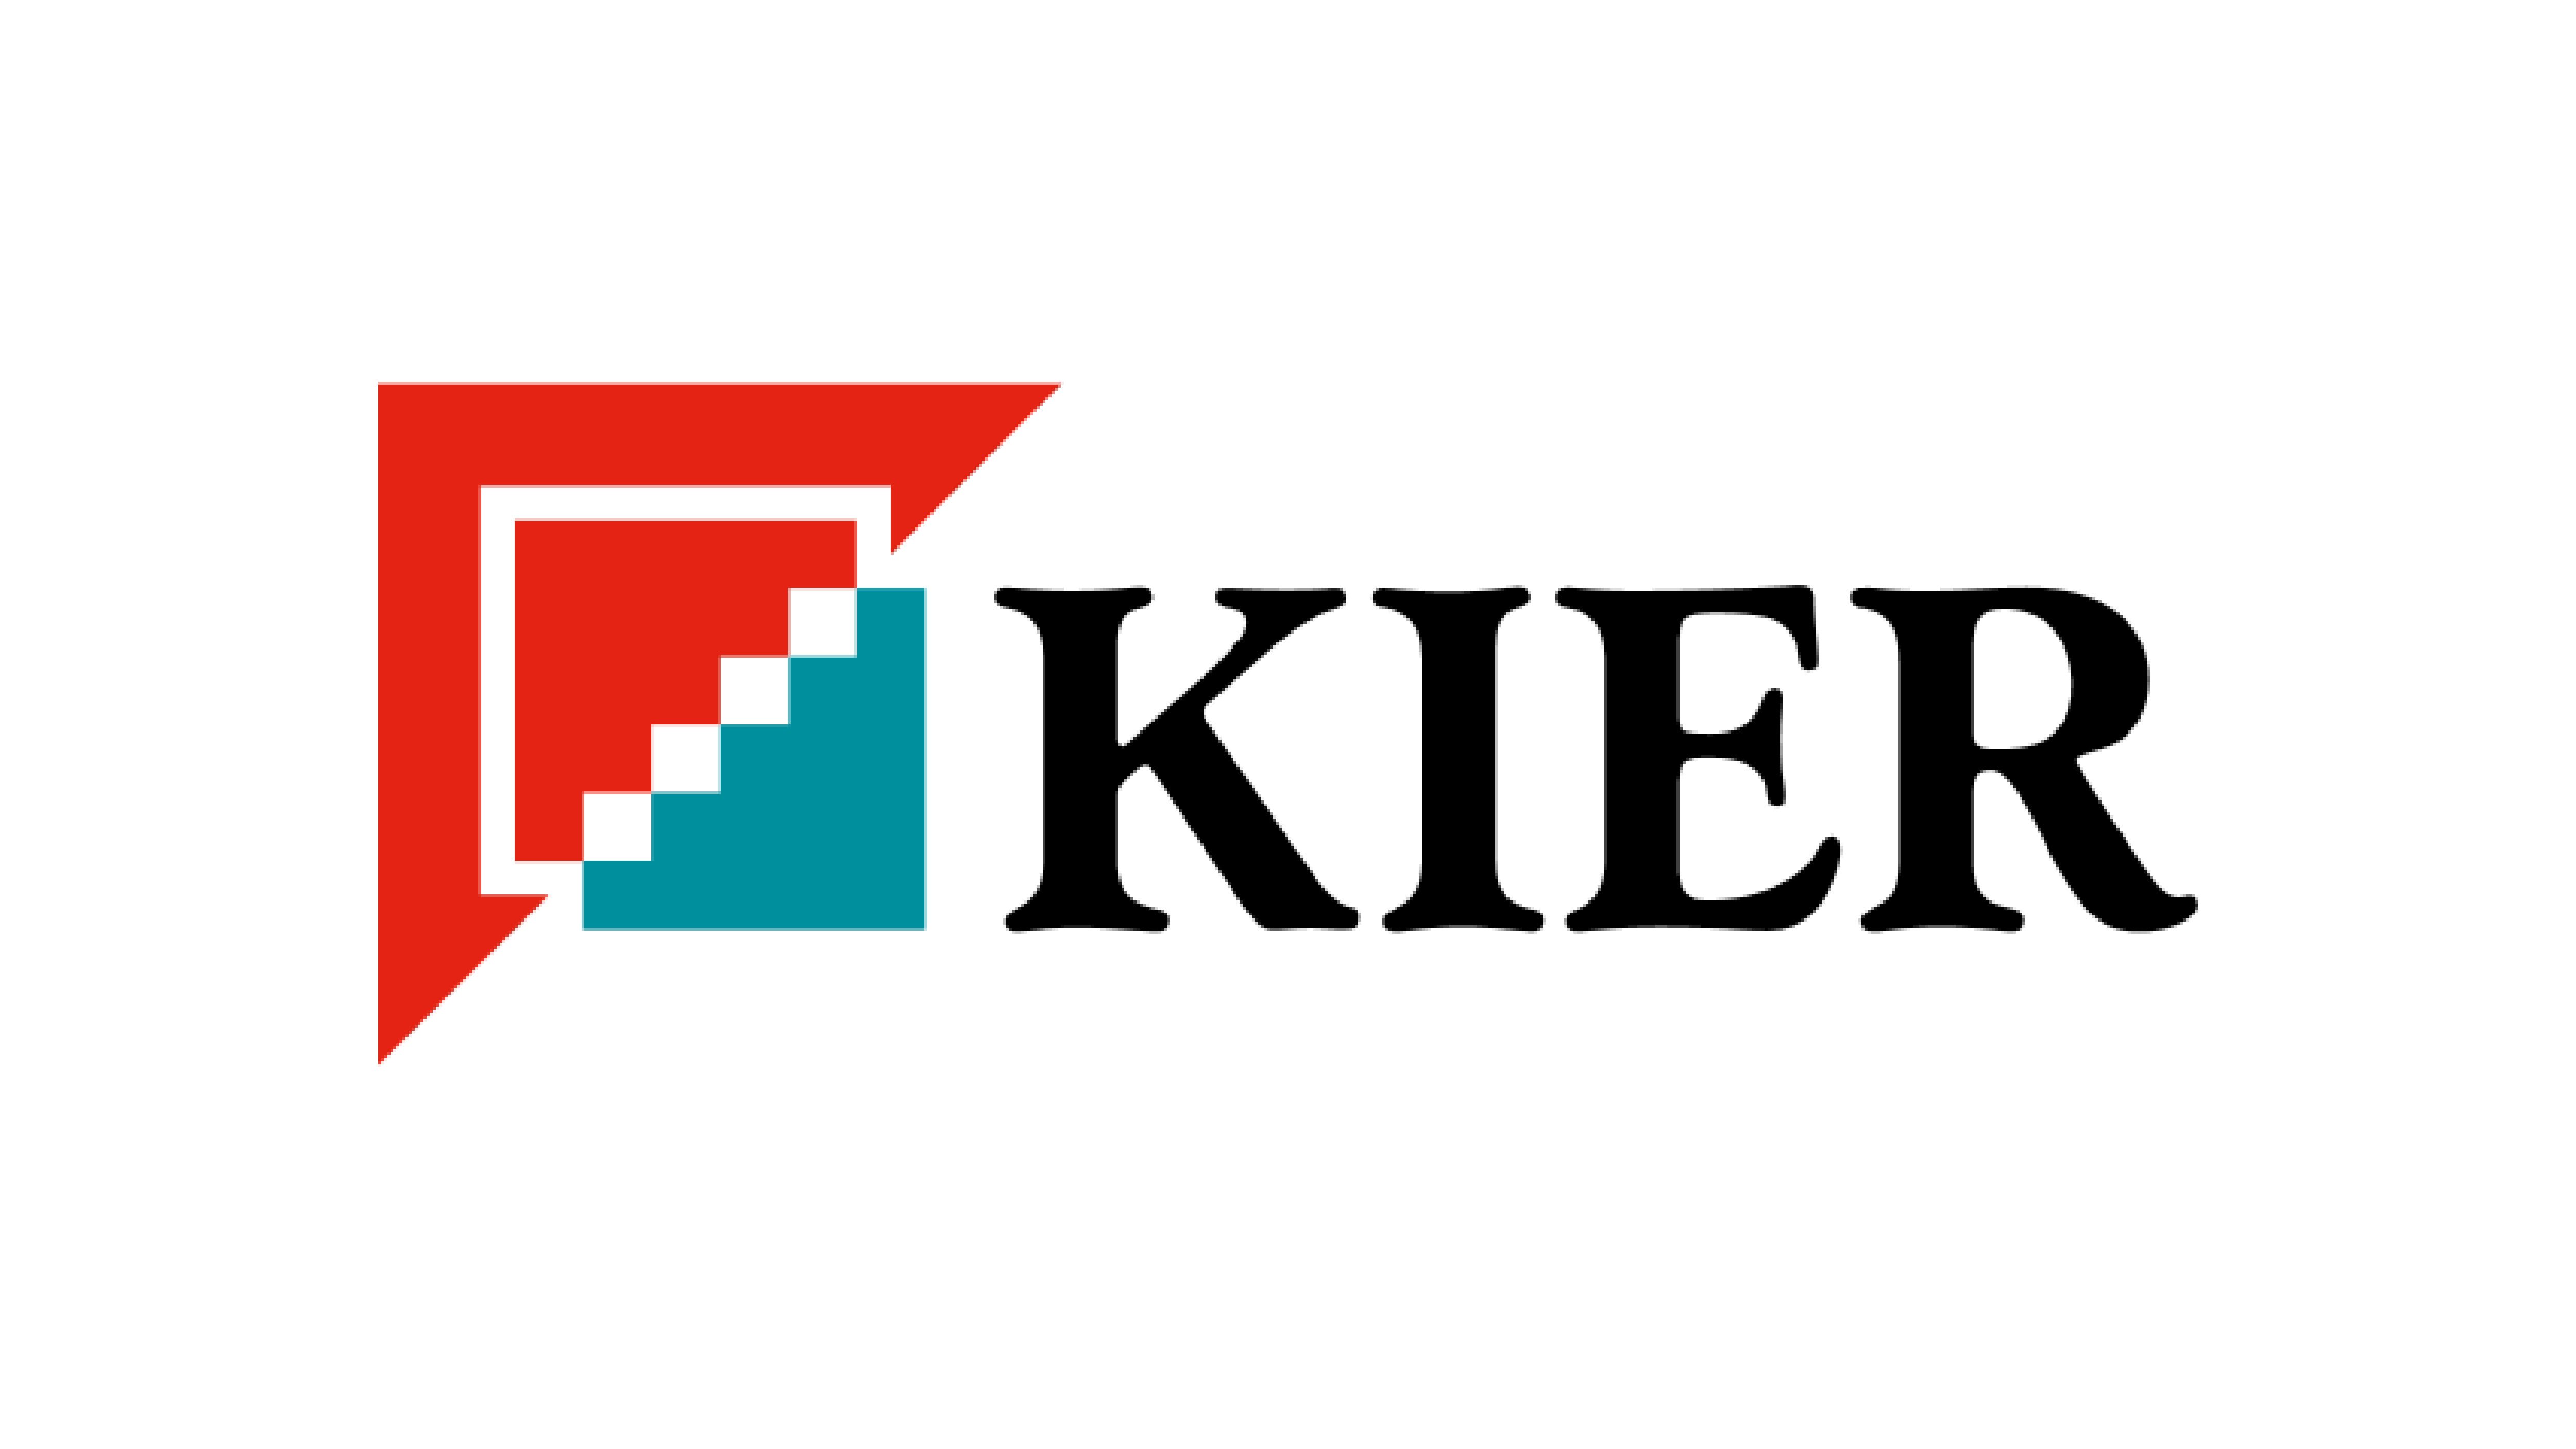 Kier reduce cabin energy use by 59%